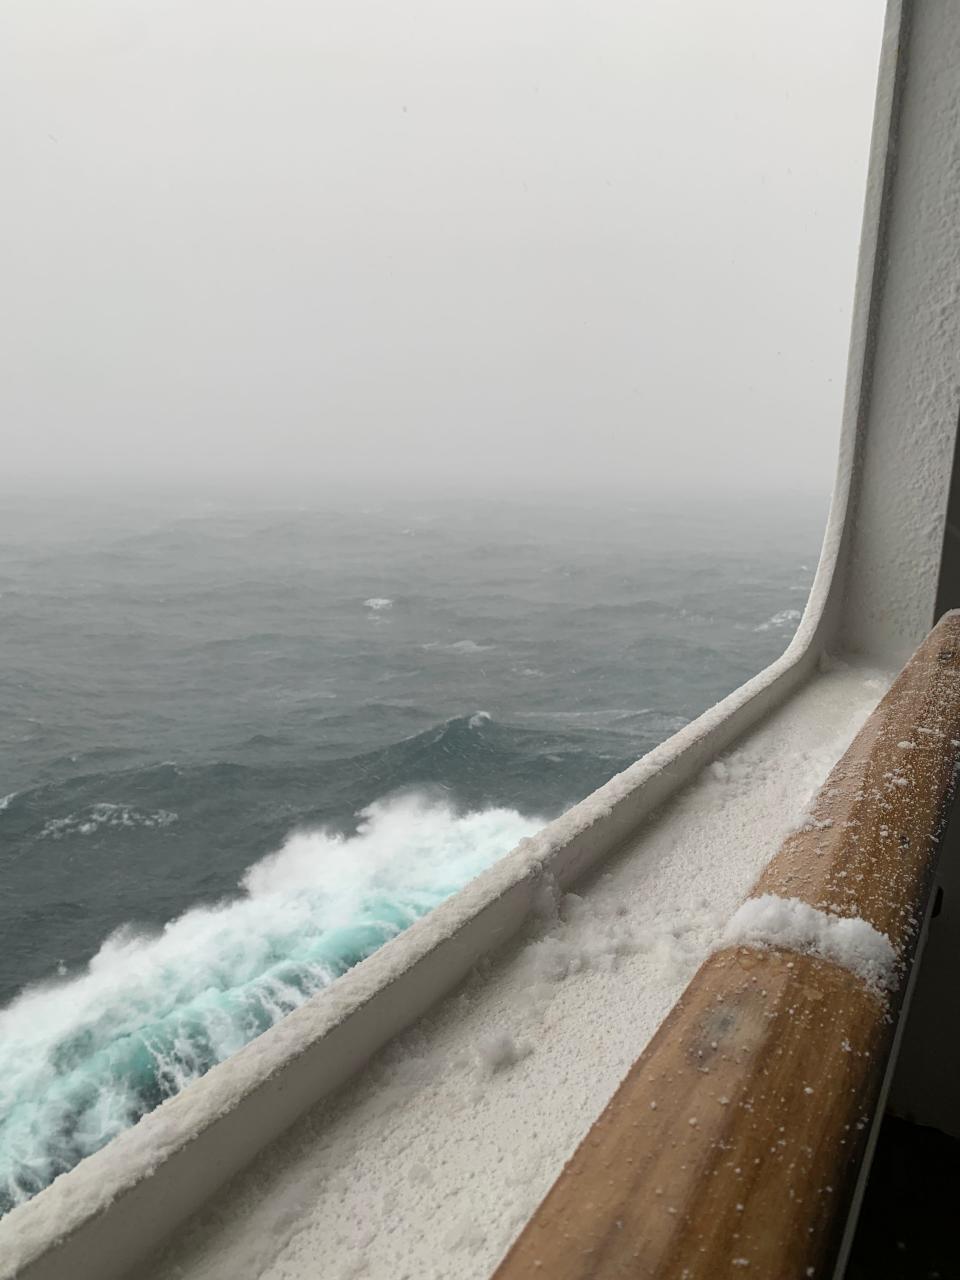 Snow on an outside window on board the Queen Mary 2 on the crossing from New York to Southampton, UK. Temperatures hovered just above zero and the seas were rough.